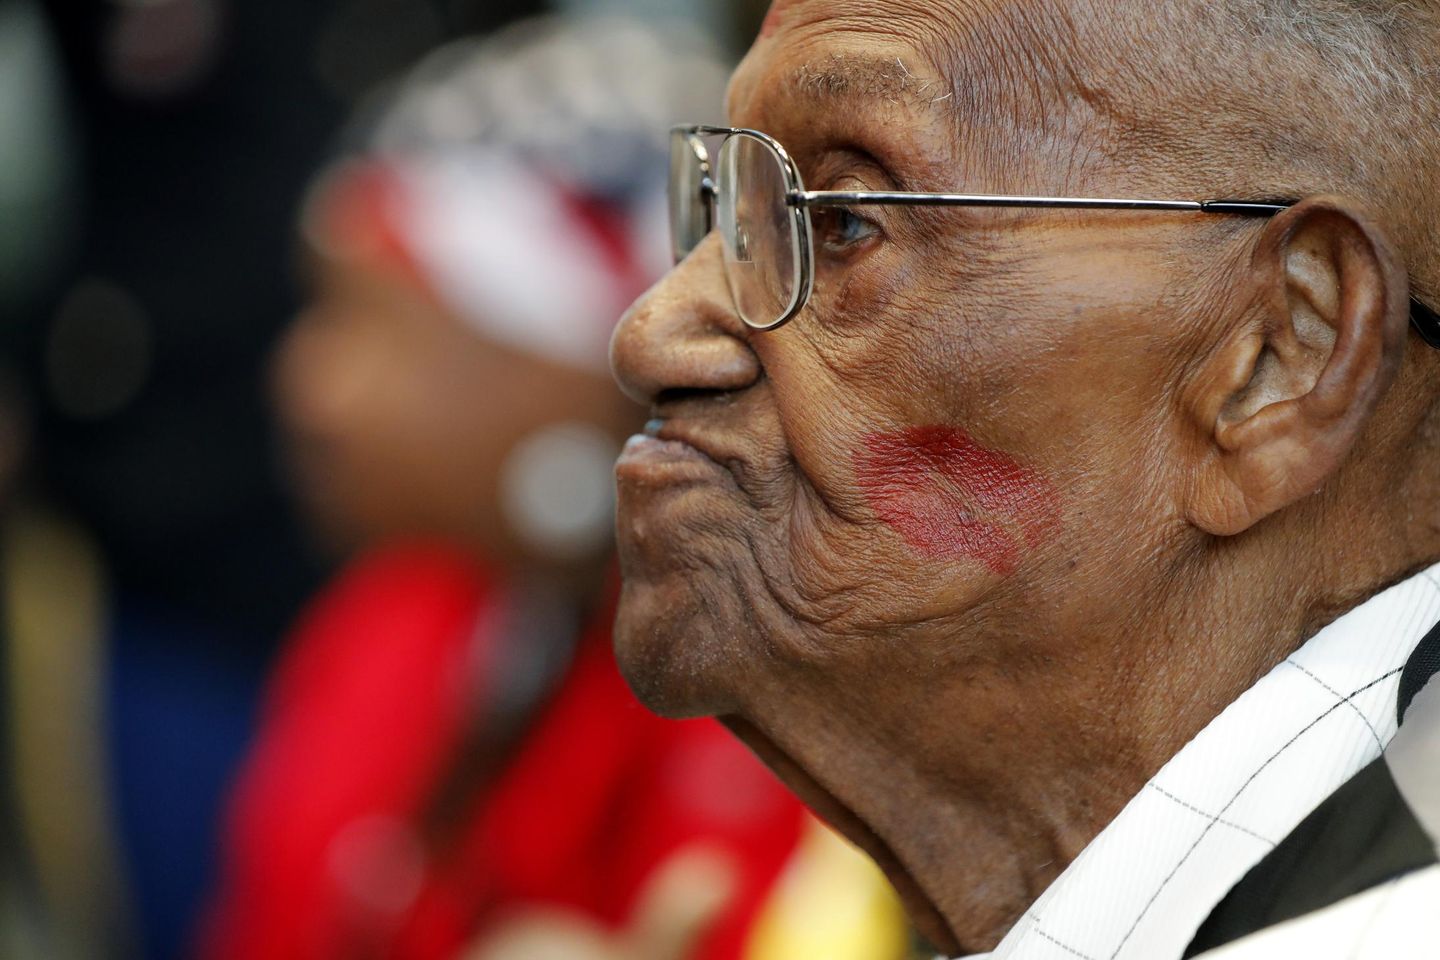 For 112-year-old veterans daughter, care is a labor of love